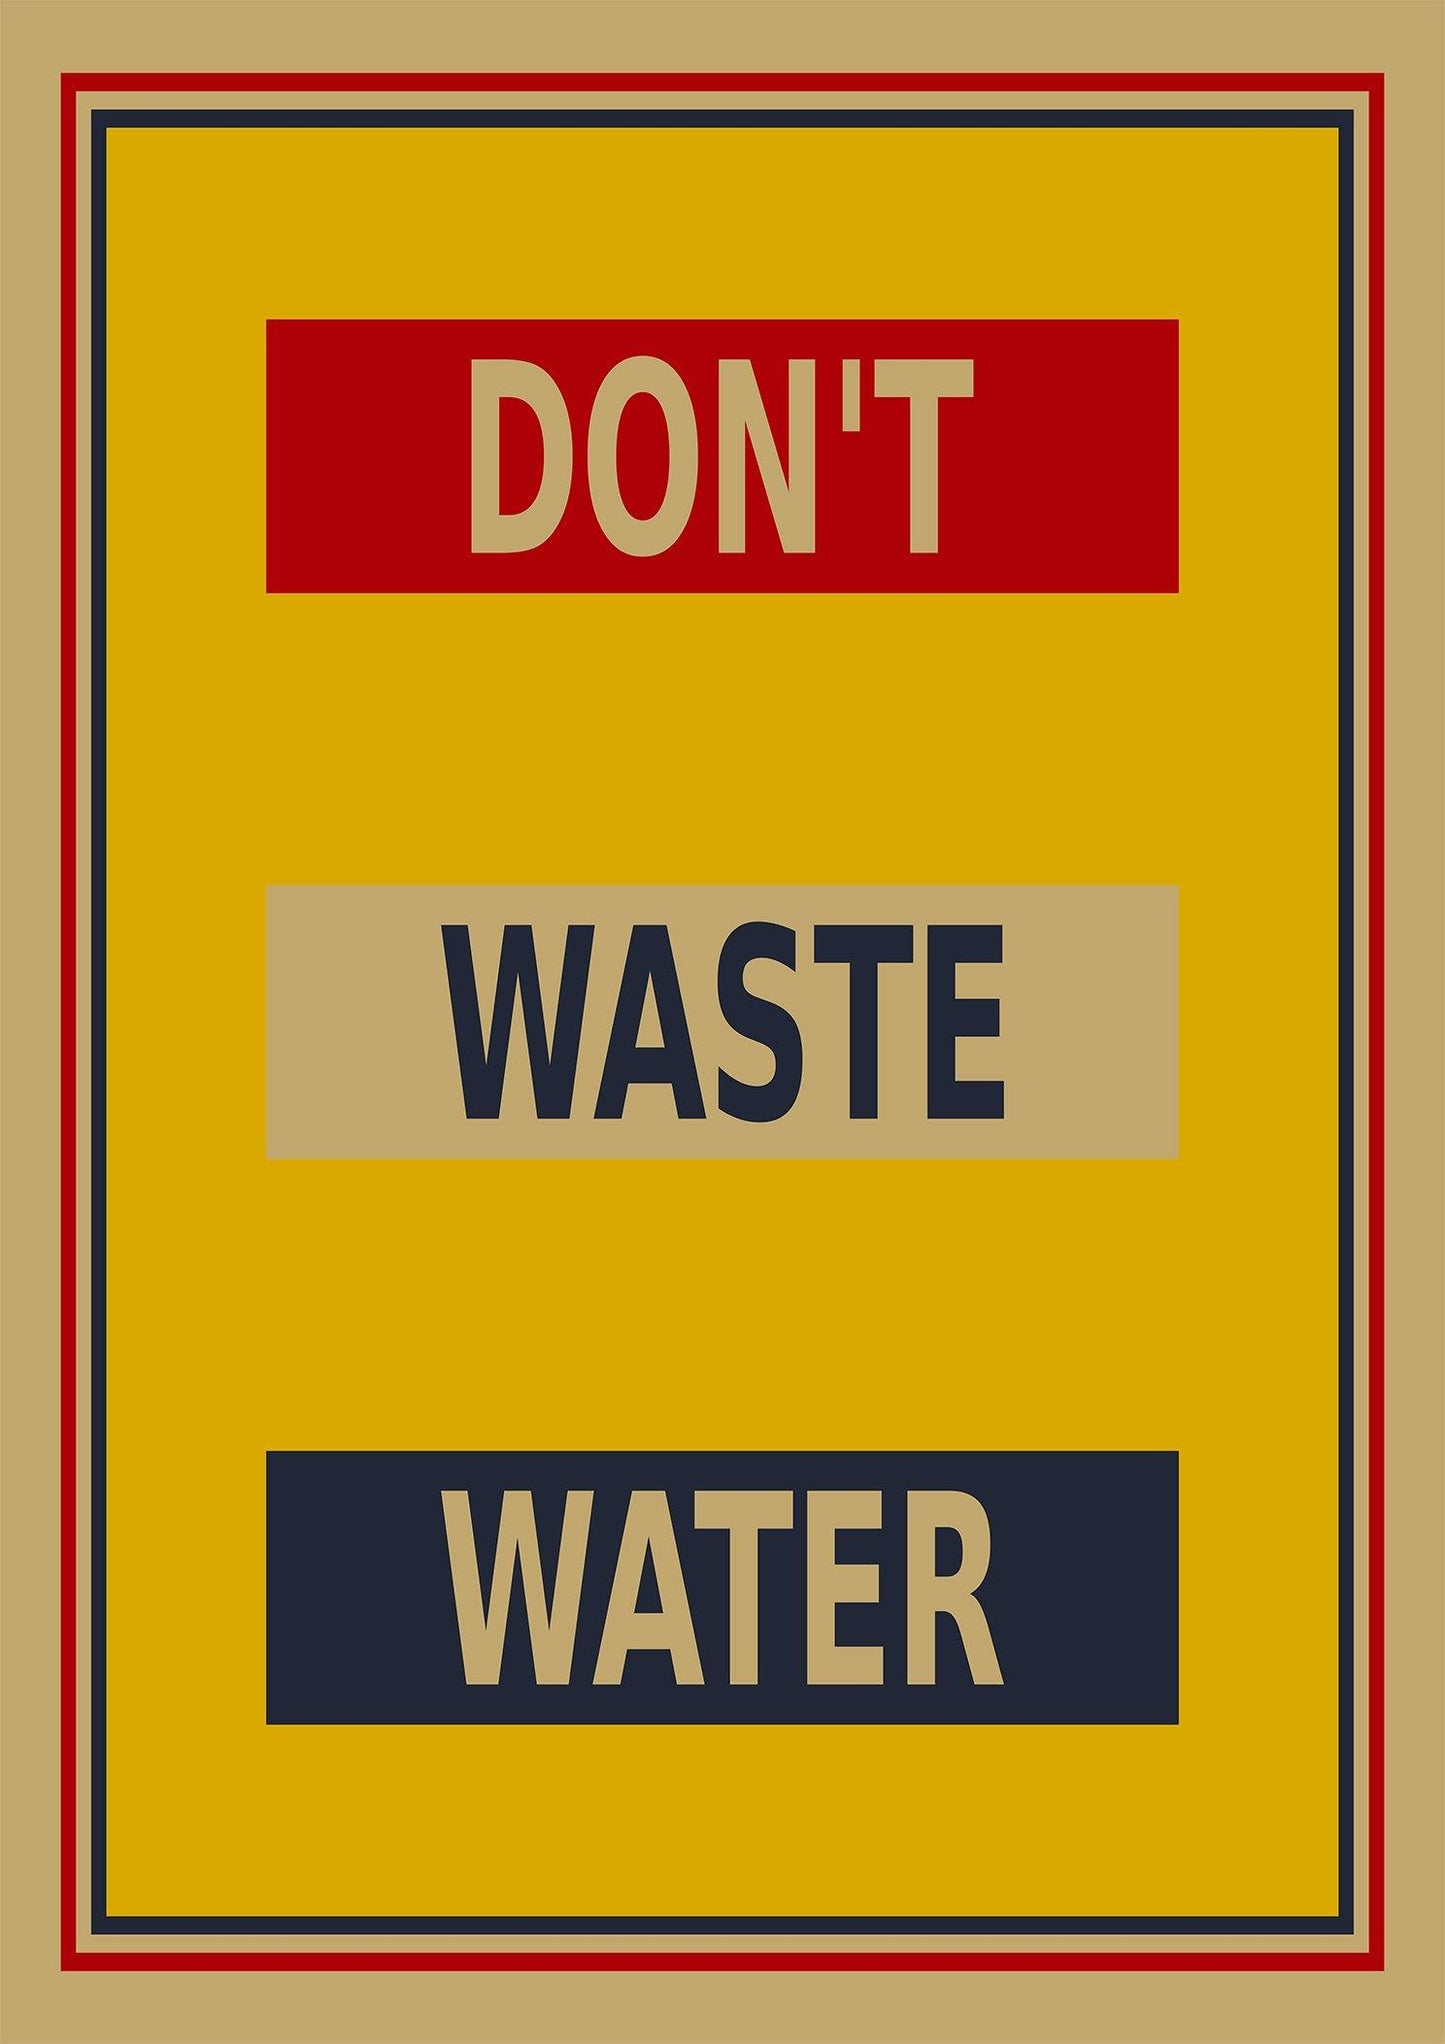 DON'T WASTE WATER POSTER: Vintage Style Save Water Art Print - Pimlico Prints